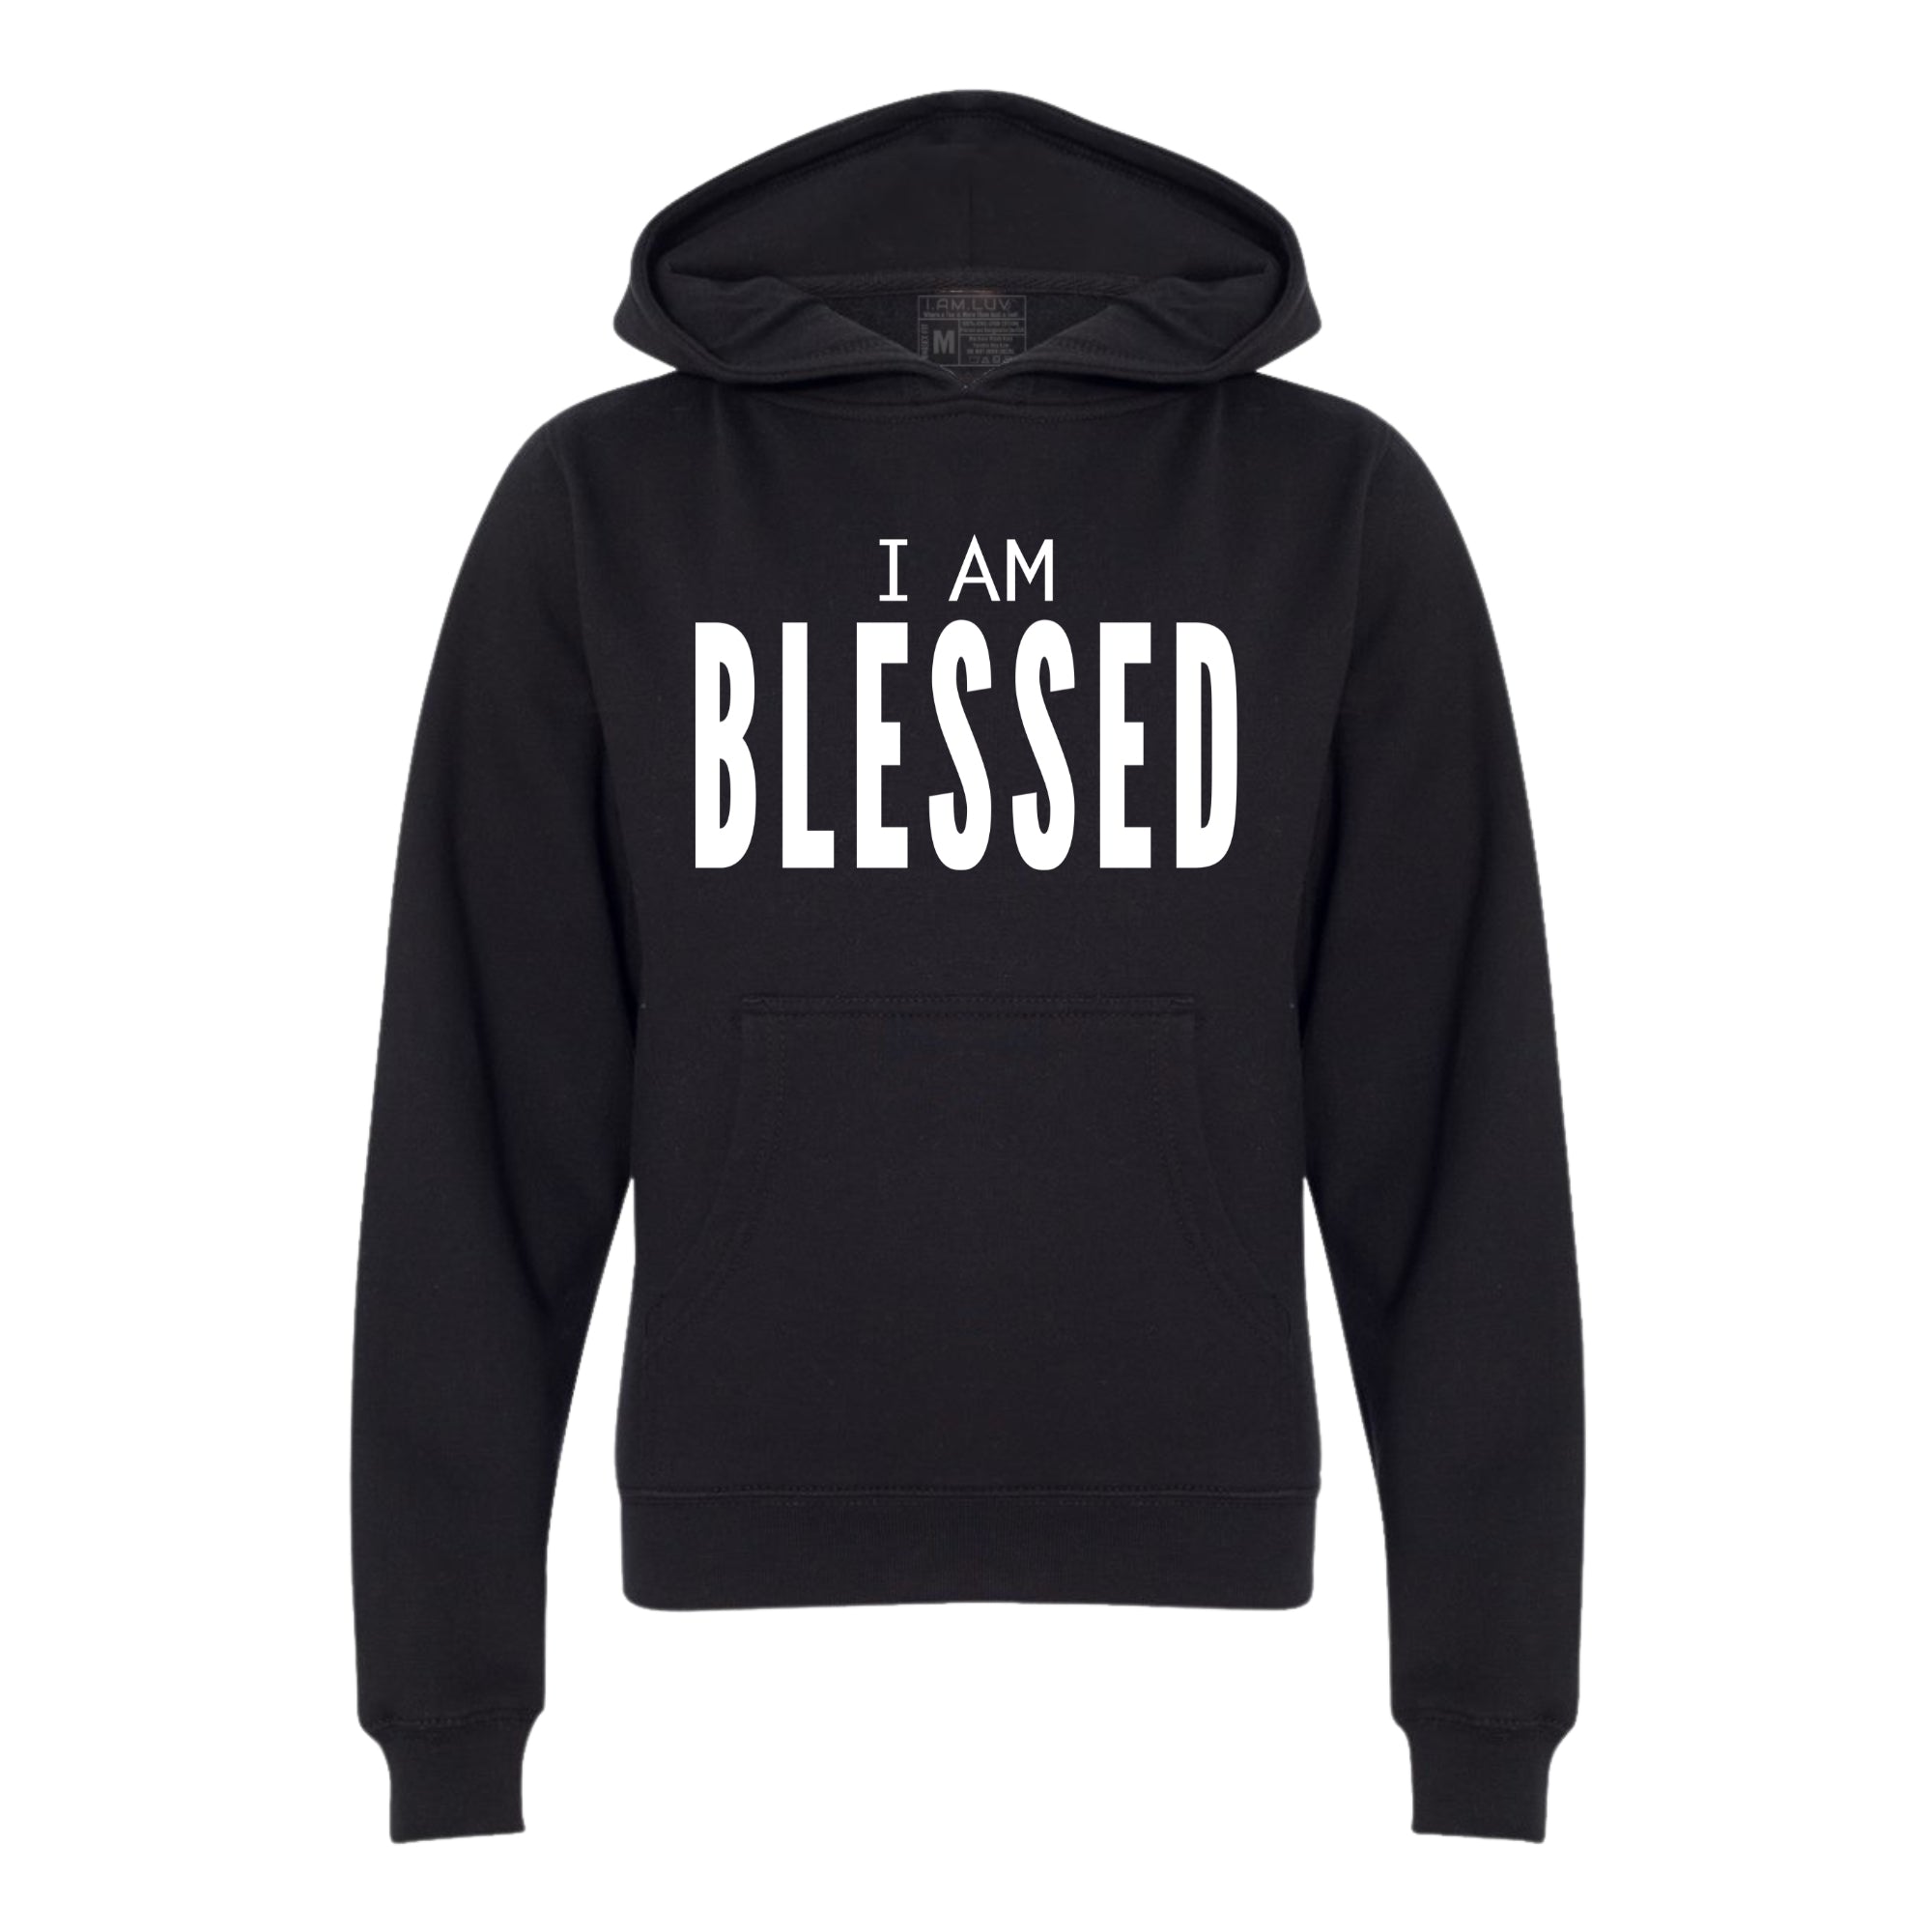 I AM BLESSED YOUTH HOODIE - IAMLUVbyV